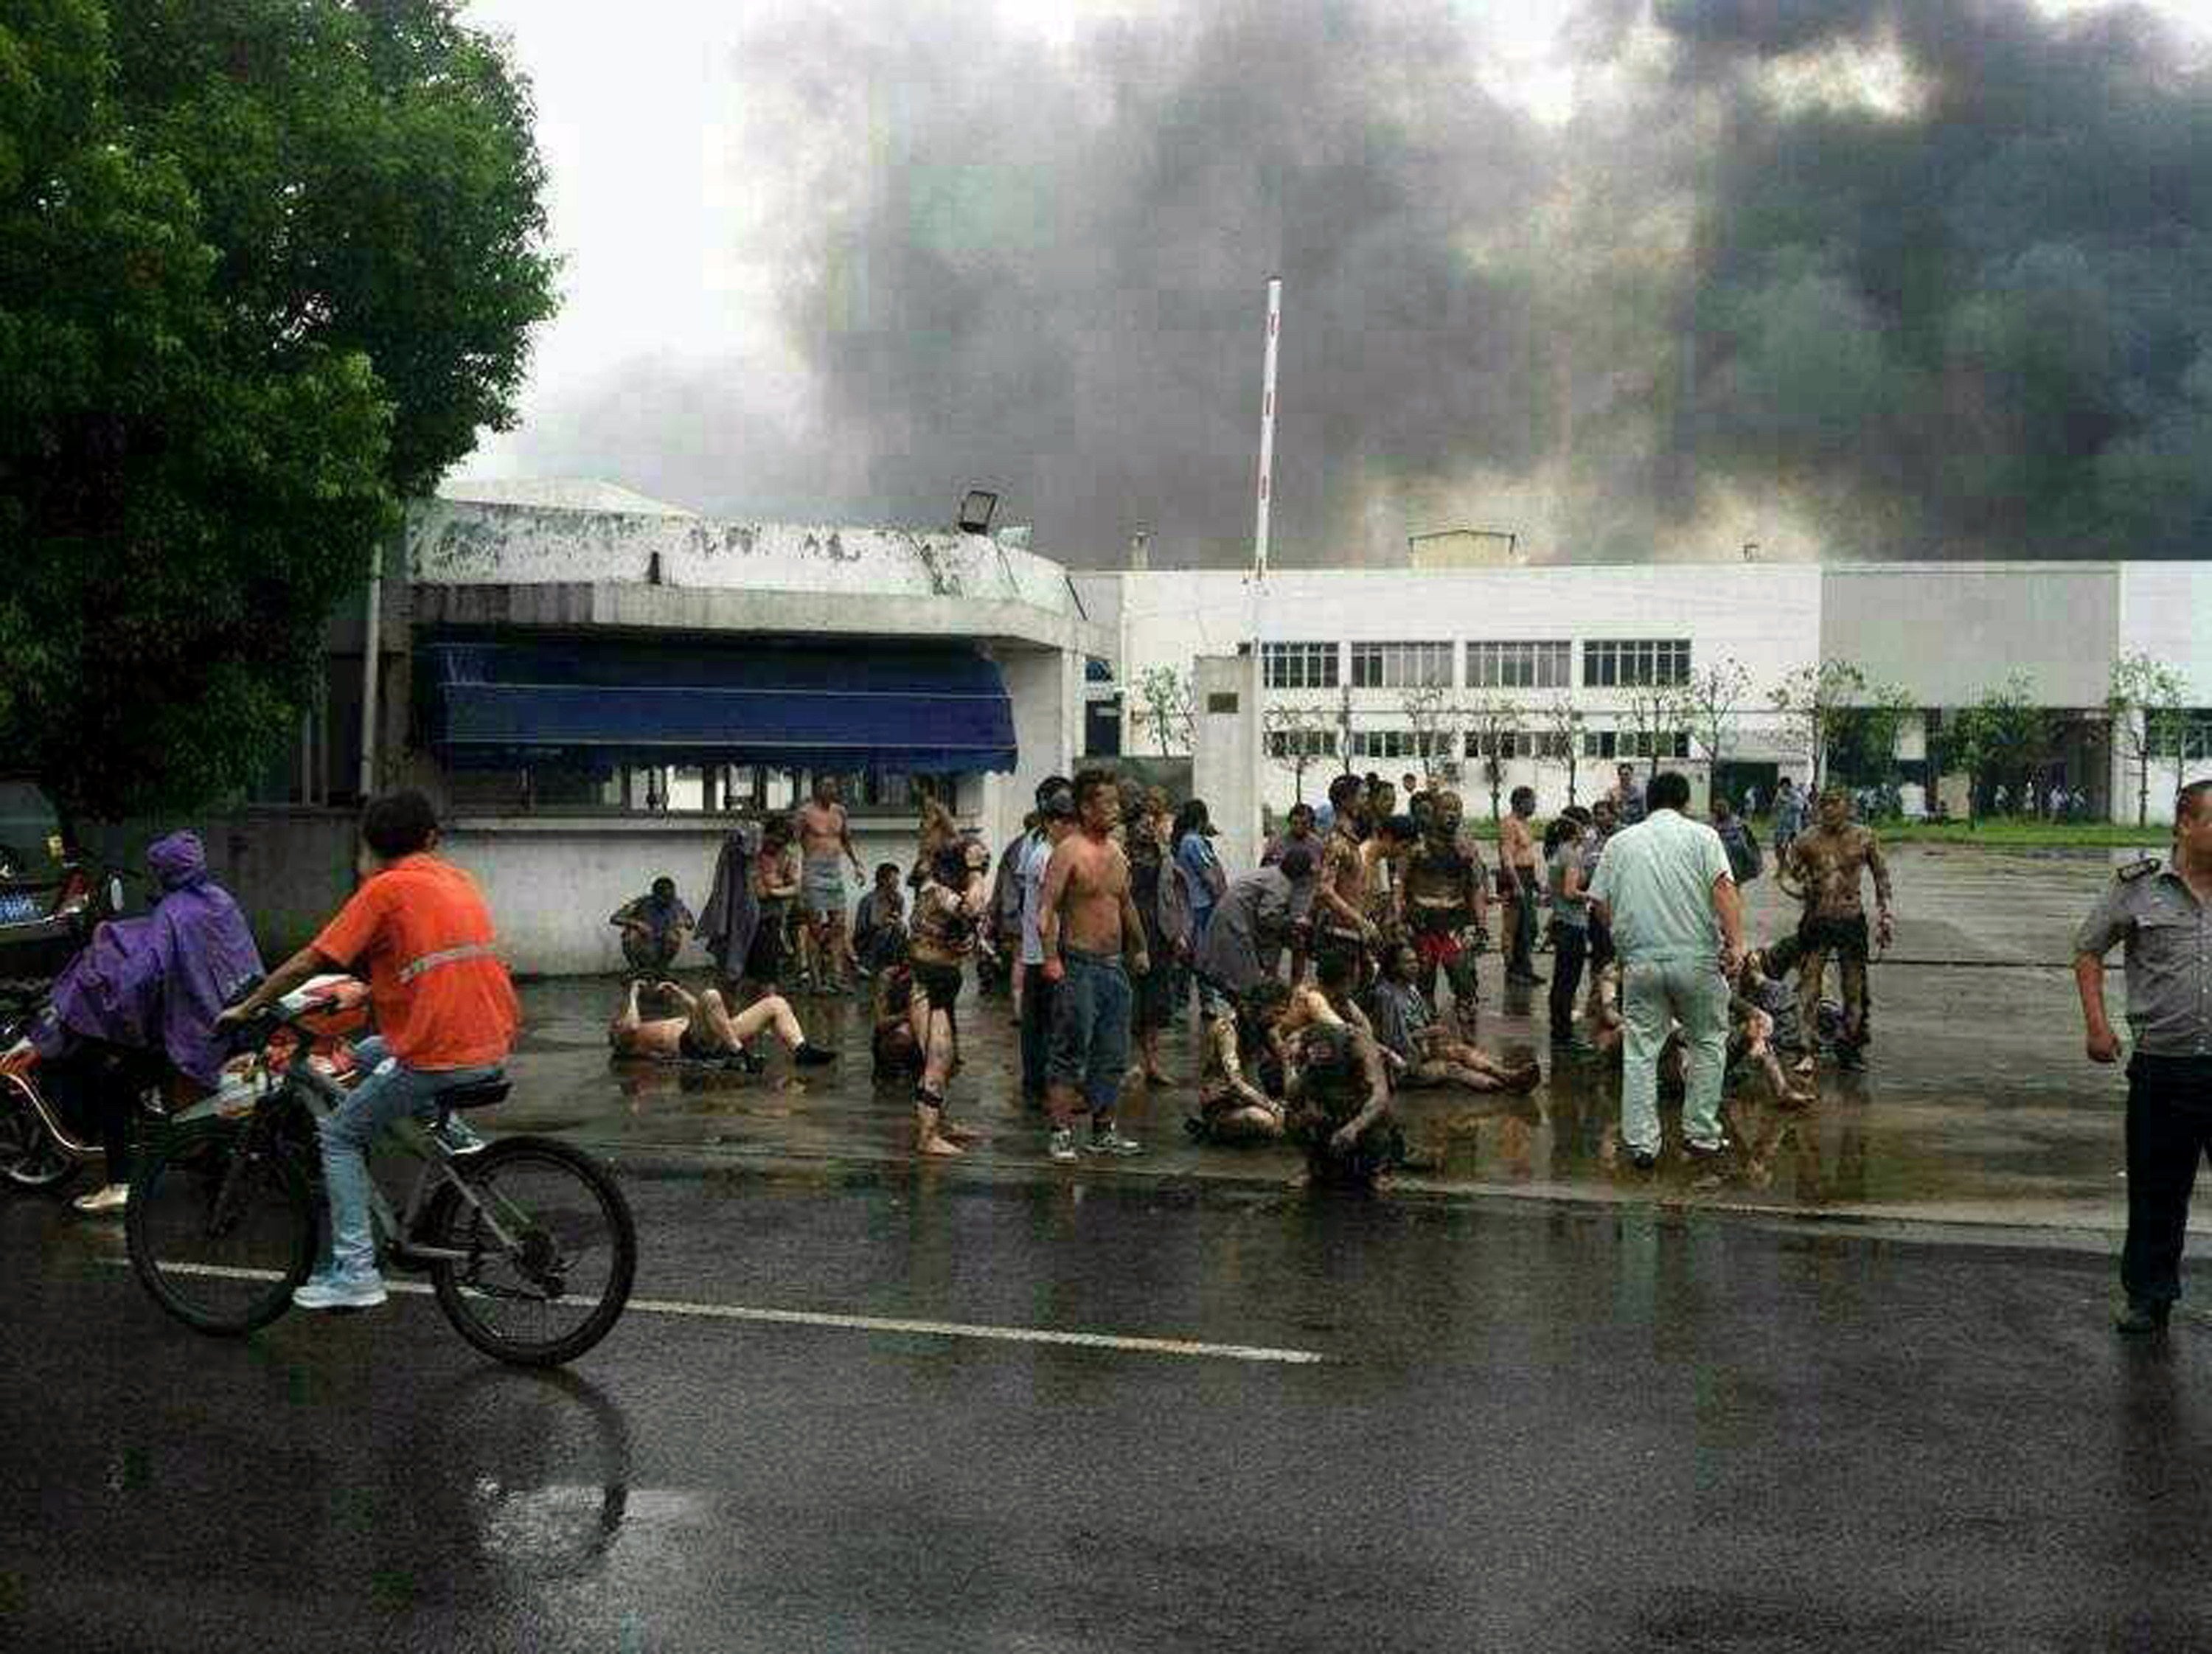 Victims gather outside the gate of a factory after an explosion in Kunshan, east China's Jiangsu province. An explosion killed 65 people as it ripped through a factory in eastern China, a government broadcaster said, injuring 150 in what appeared to be an industrial accident